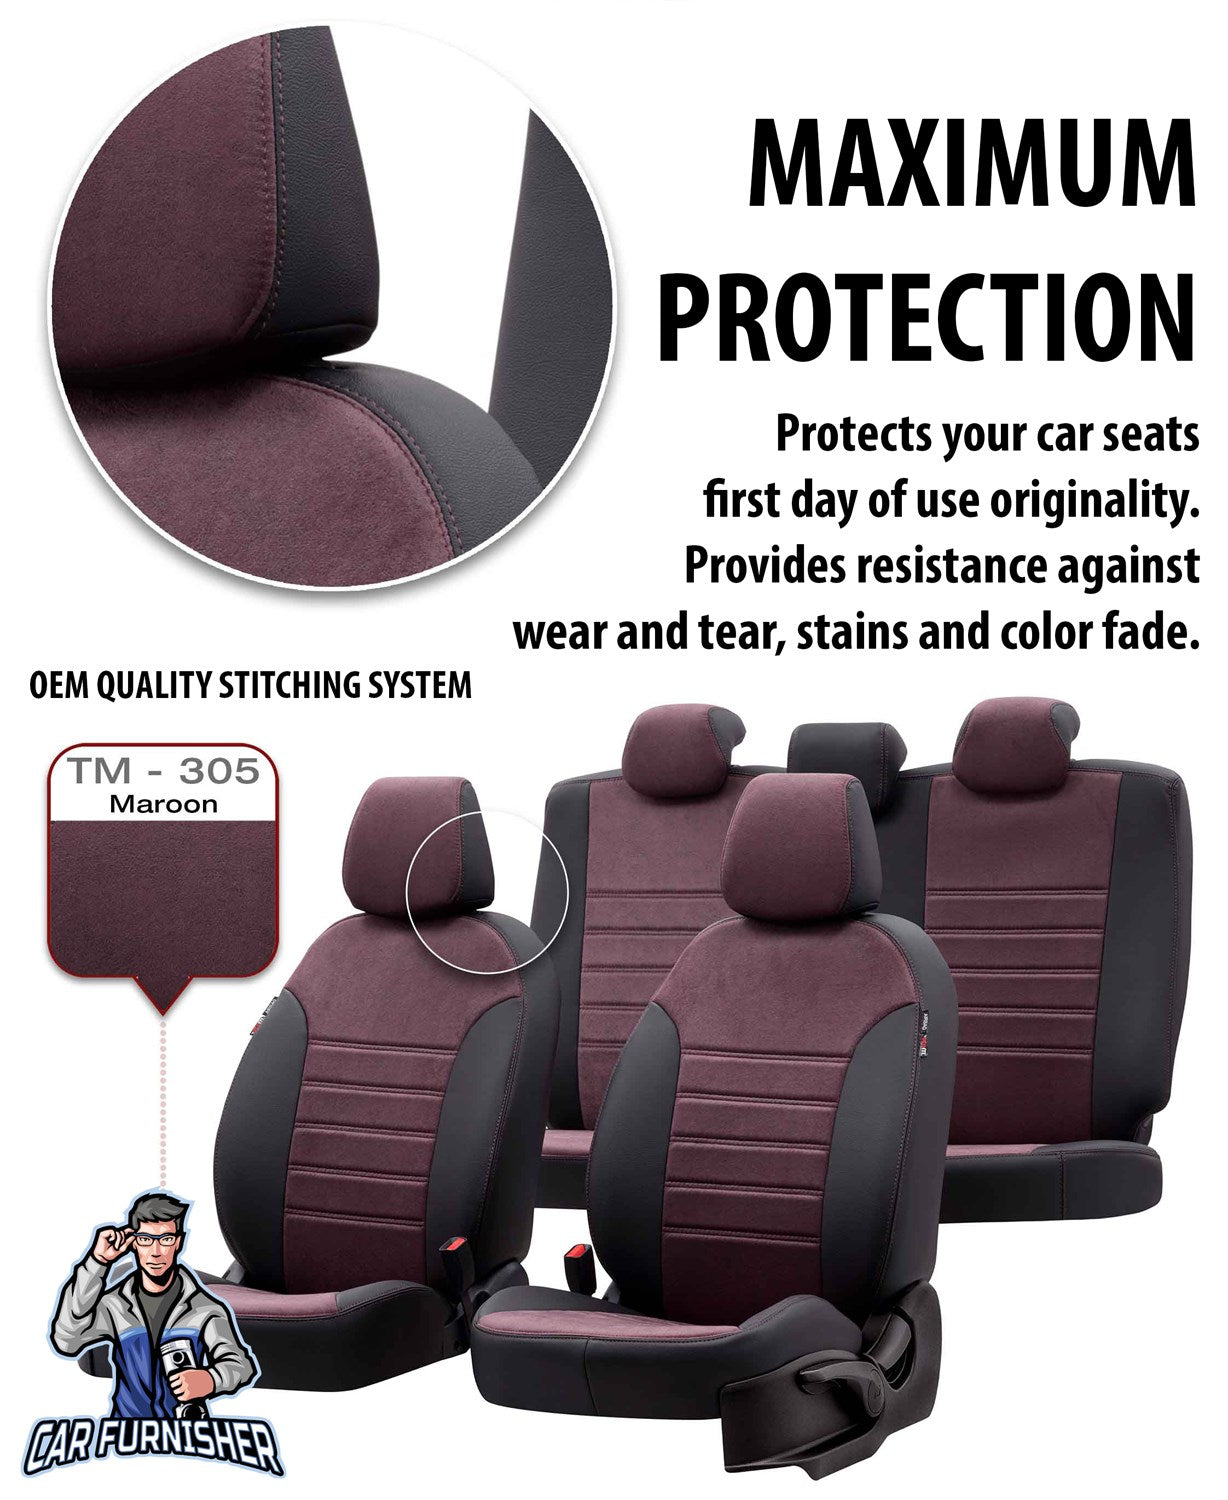 Chery Alia Seat Covers Milano Suede Design Smoked Black Leather & Suede Fabric